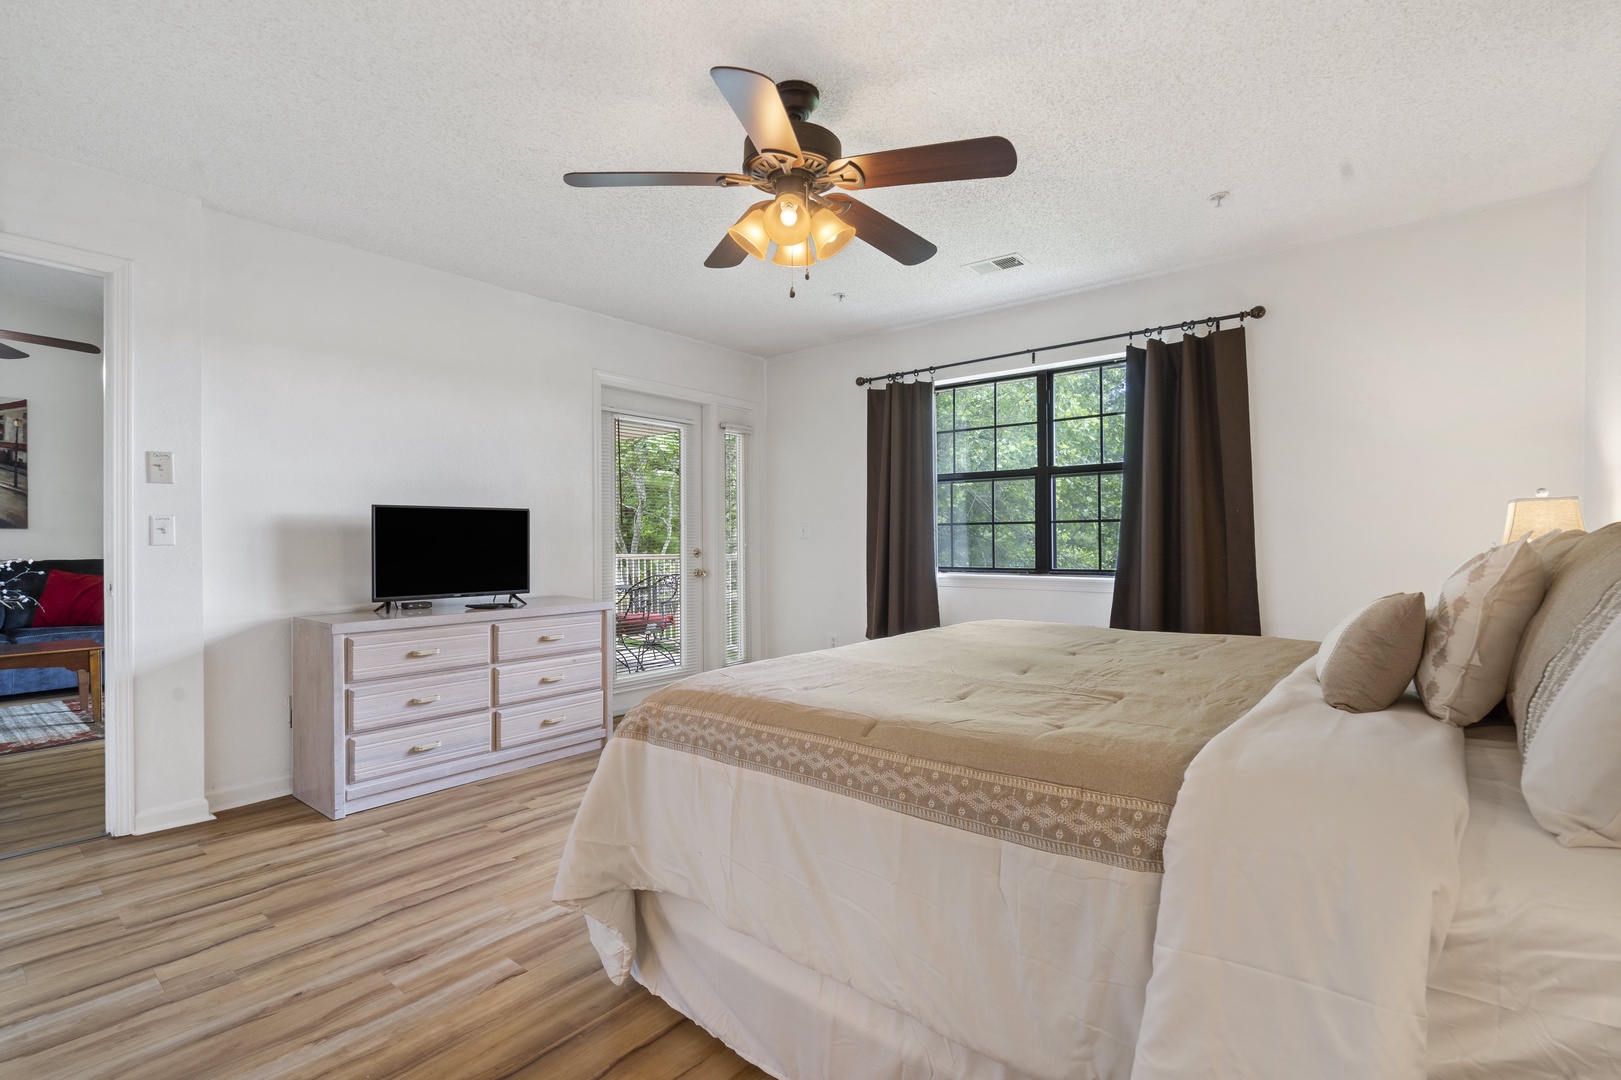 Master bedroom with en-suite for your convenience